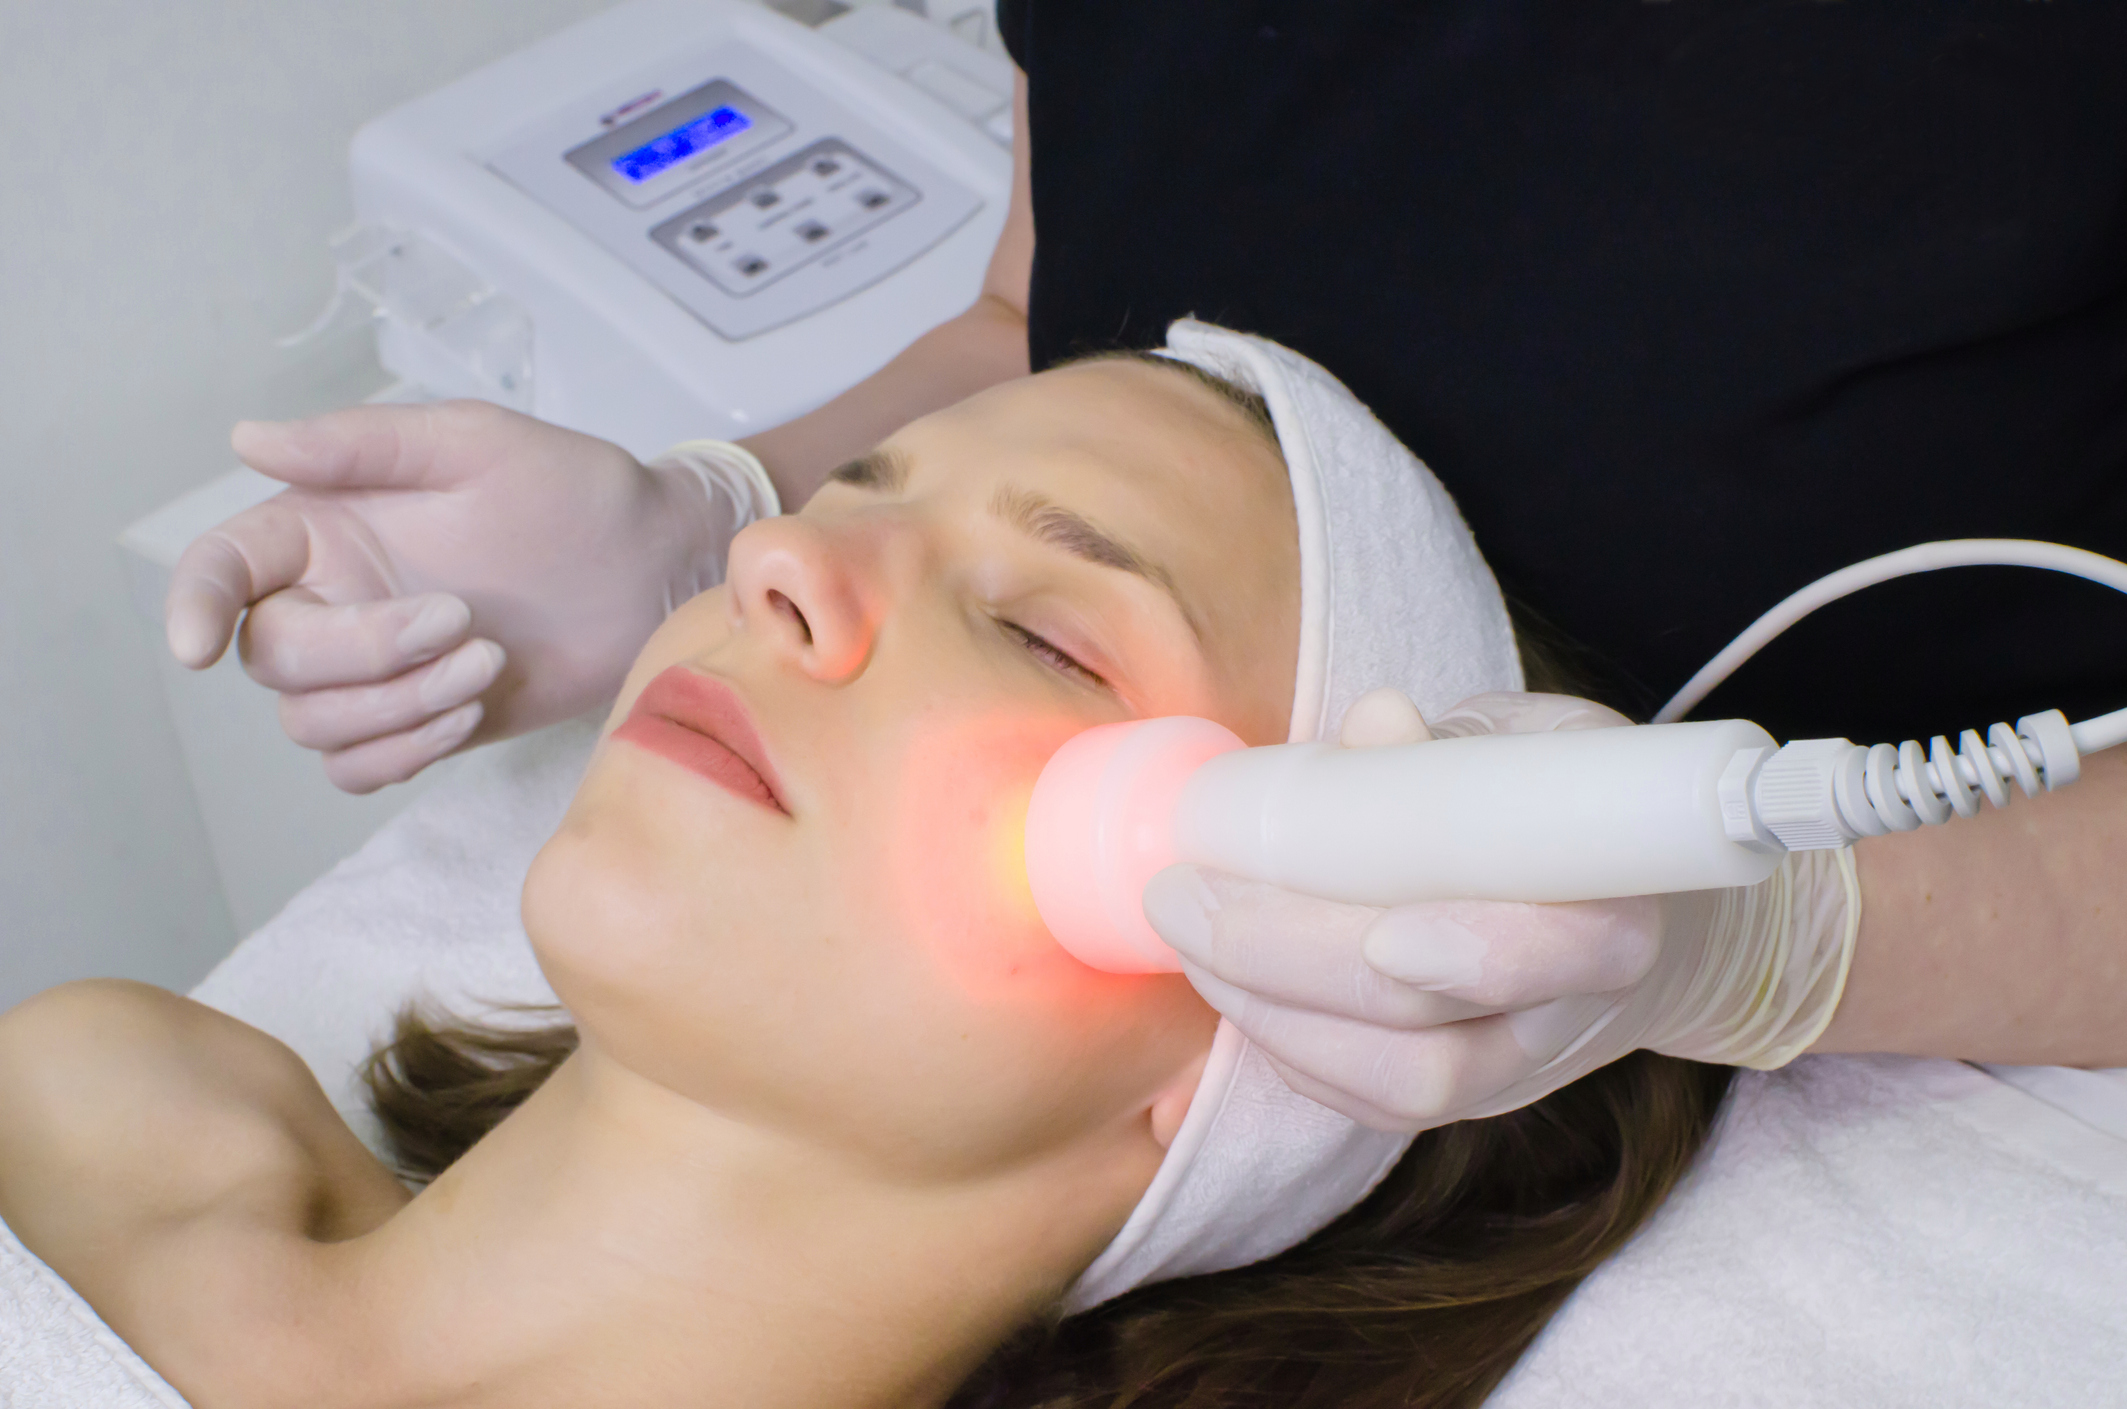 beautician doing red led light therapy to female customer in beauty salon, facial photo therapy for skin pore cleansing. Anti-aging treatments and photo rejuvenation procedure